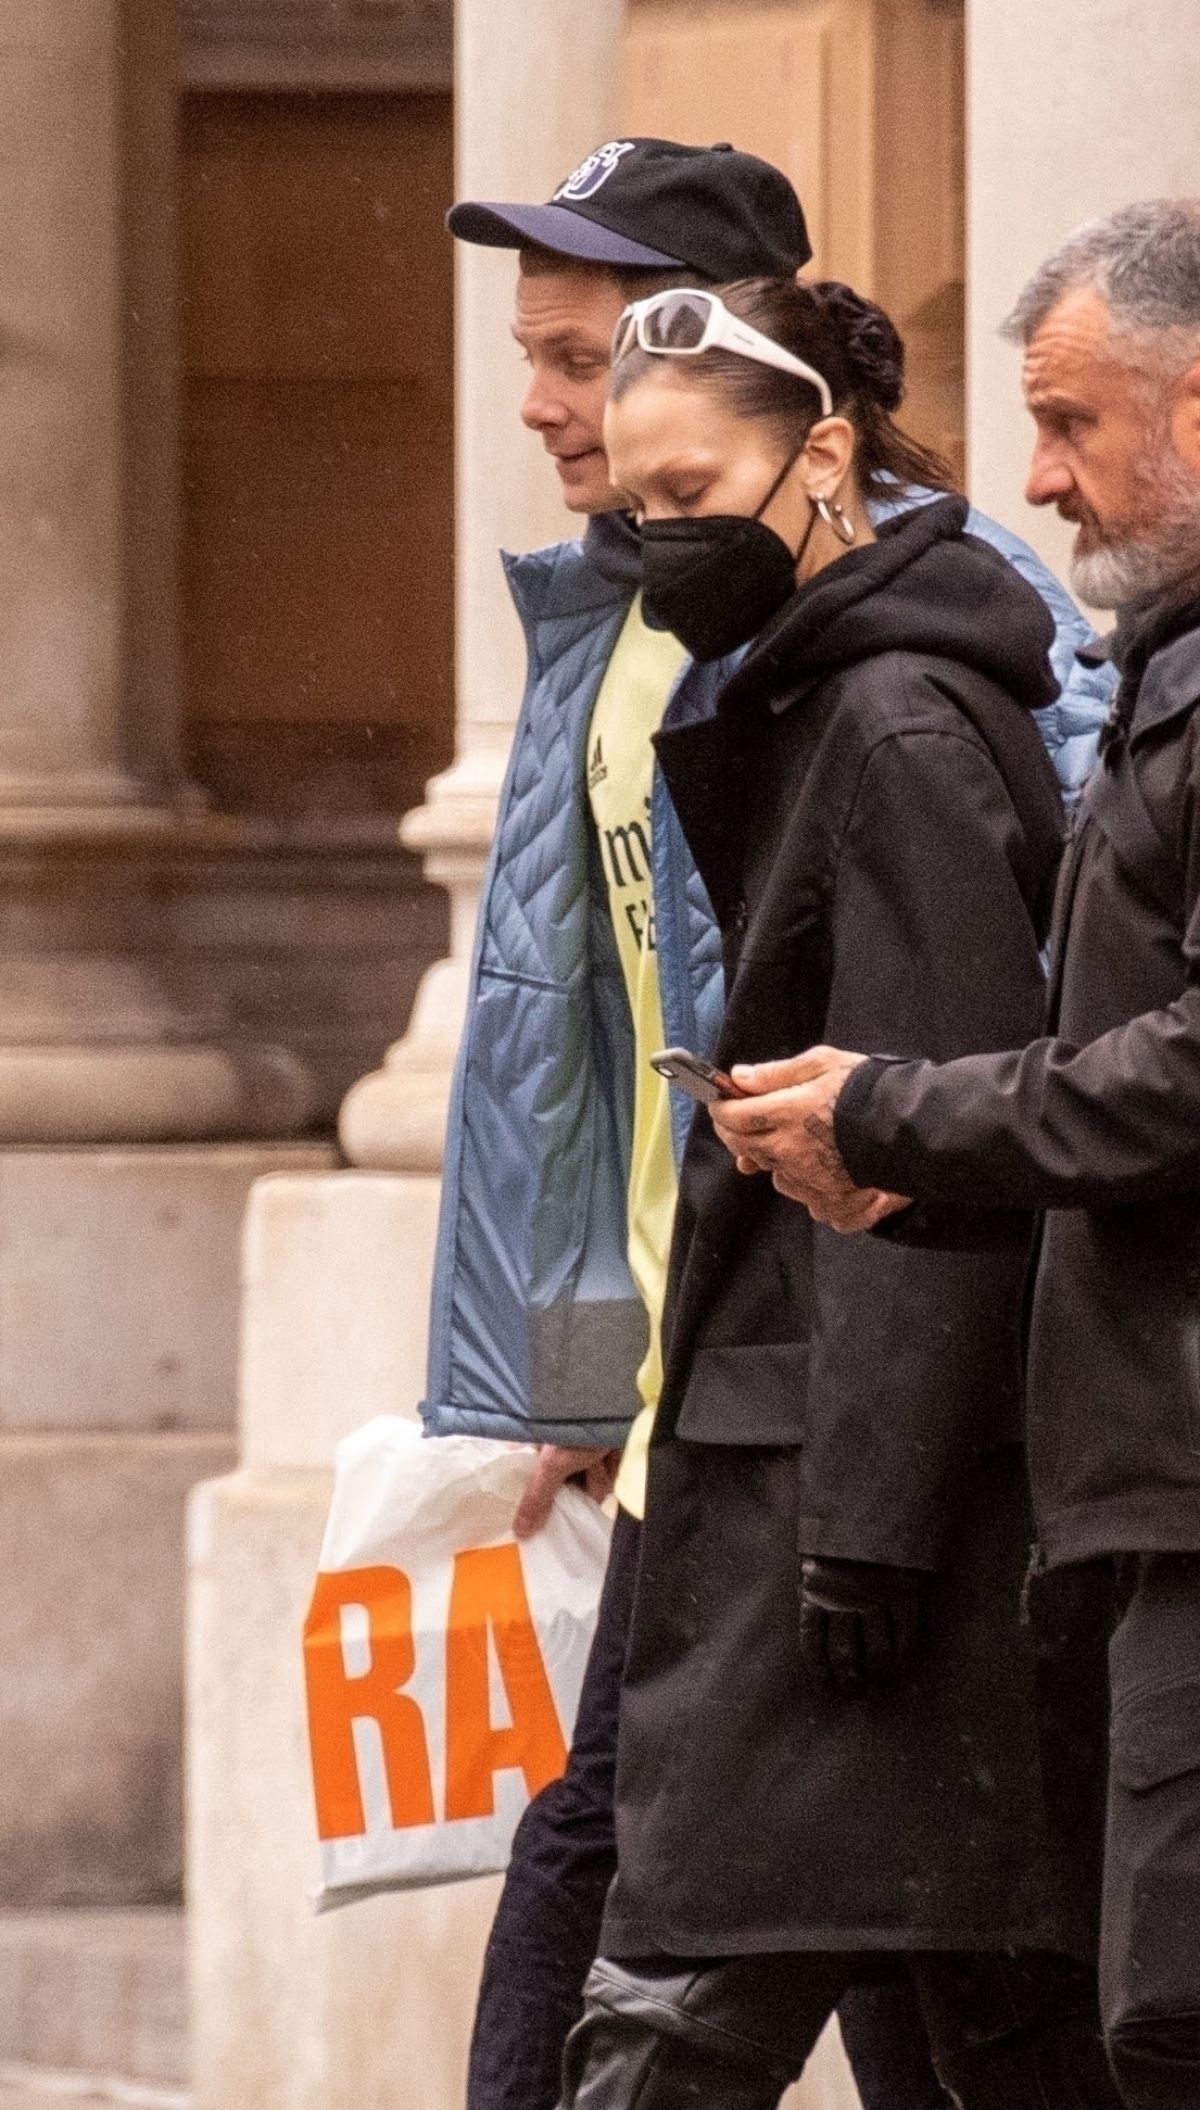 Bella Hadid – Seen going into the Royal Academy of